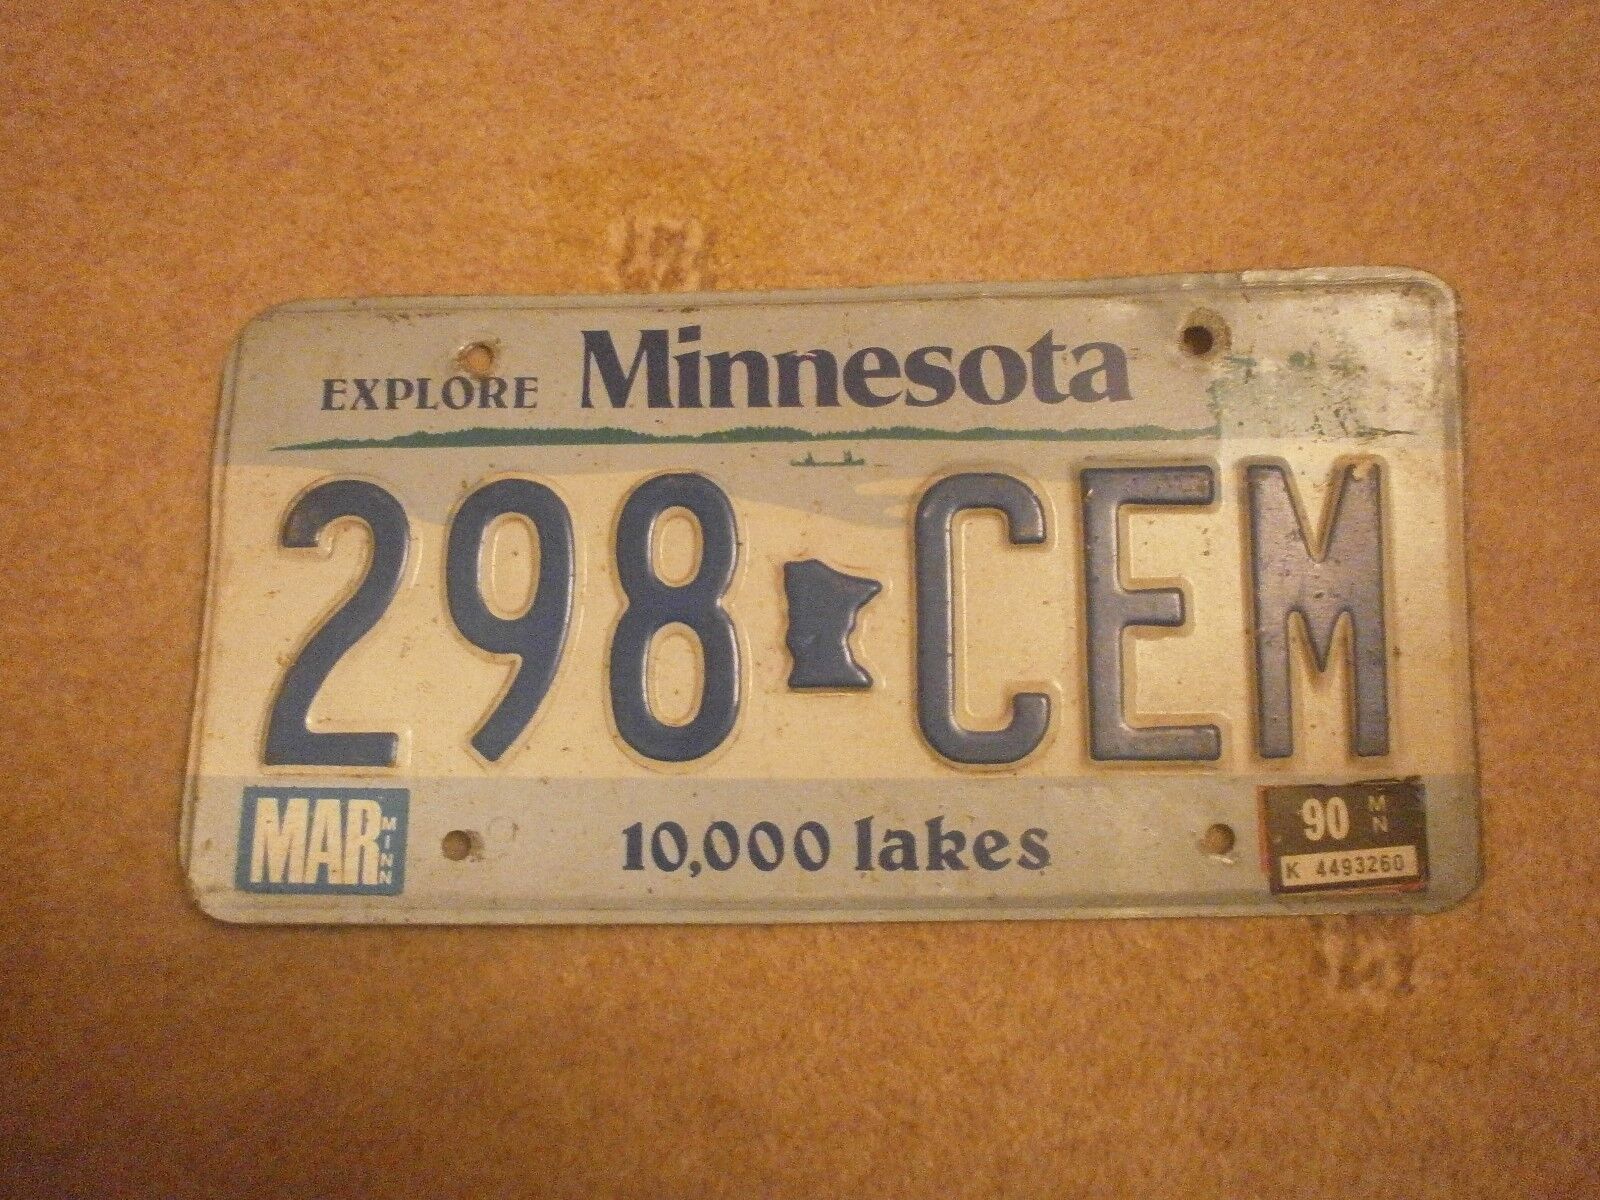 AMERICAN MINNESOTA 10,000 LAKES GRAPHIC EARLY TYPE MAR \'90 #298 CEM NUMBER PLATE